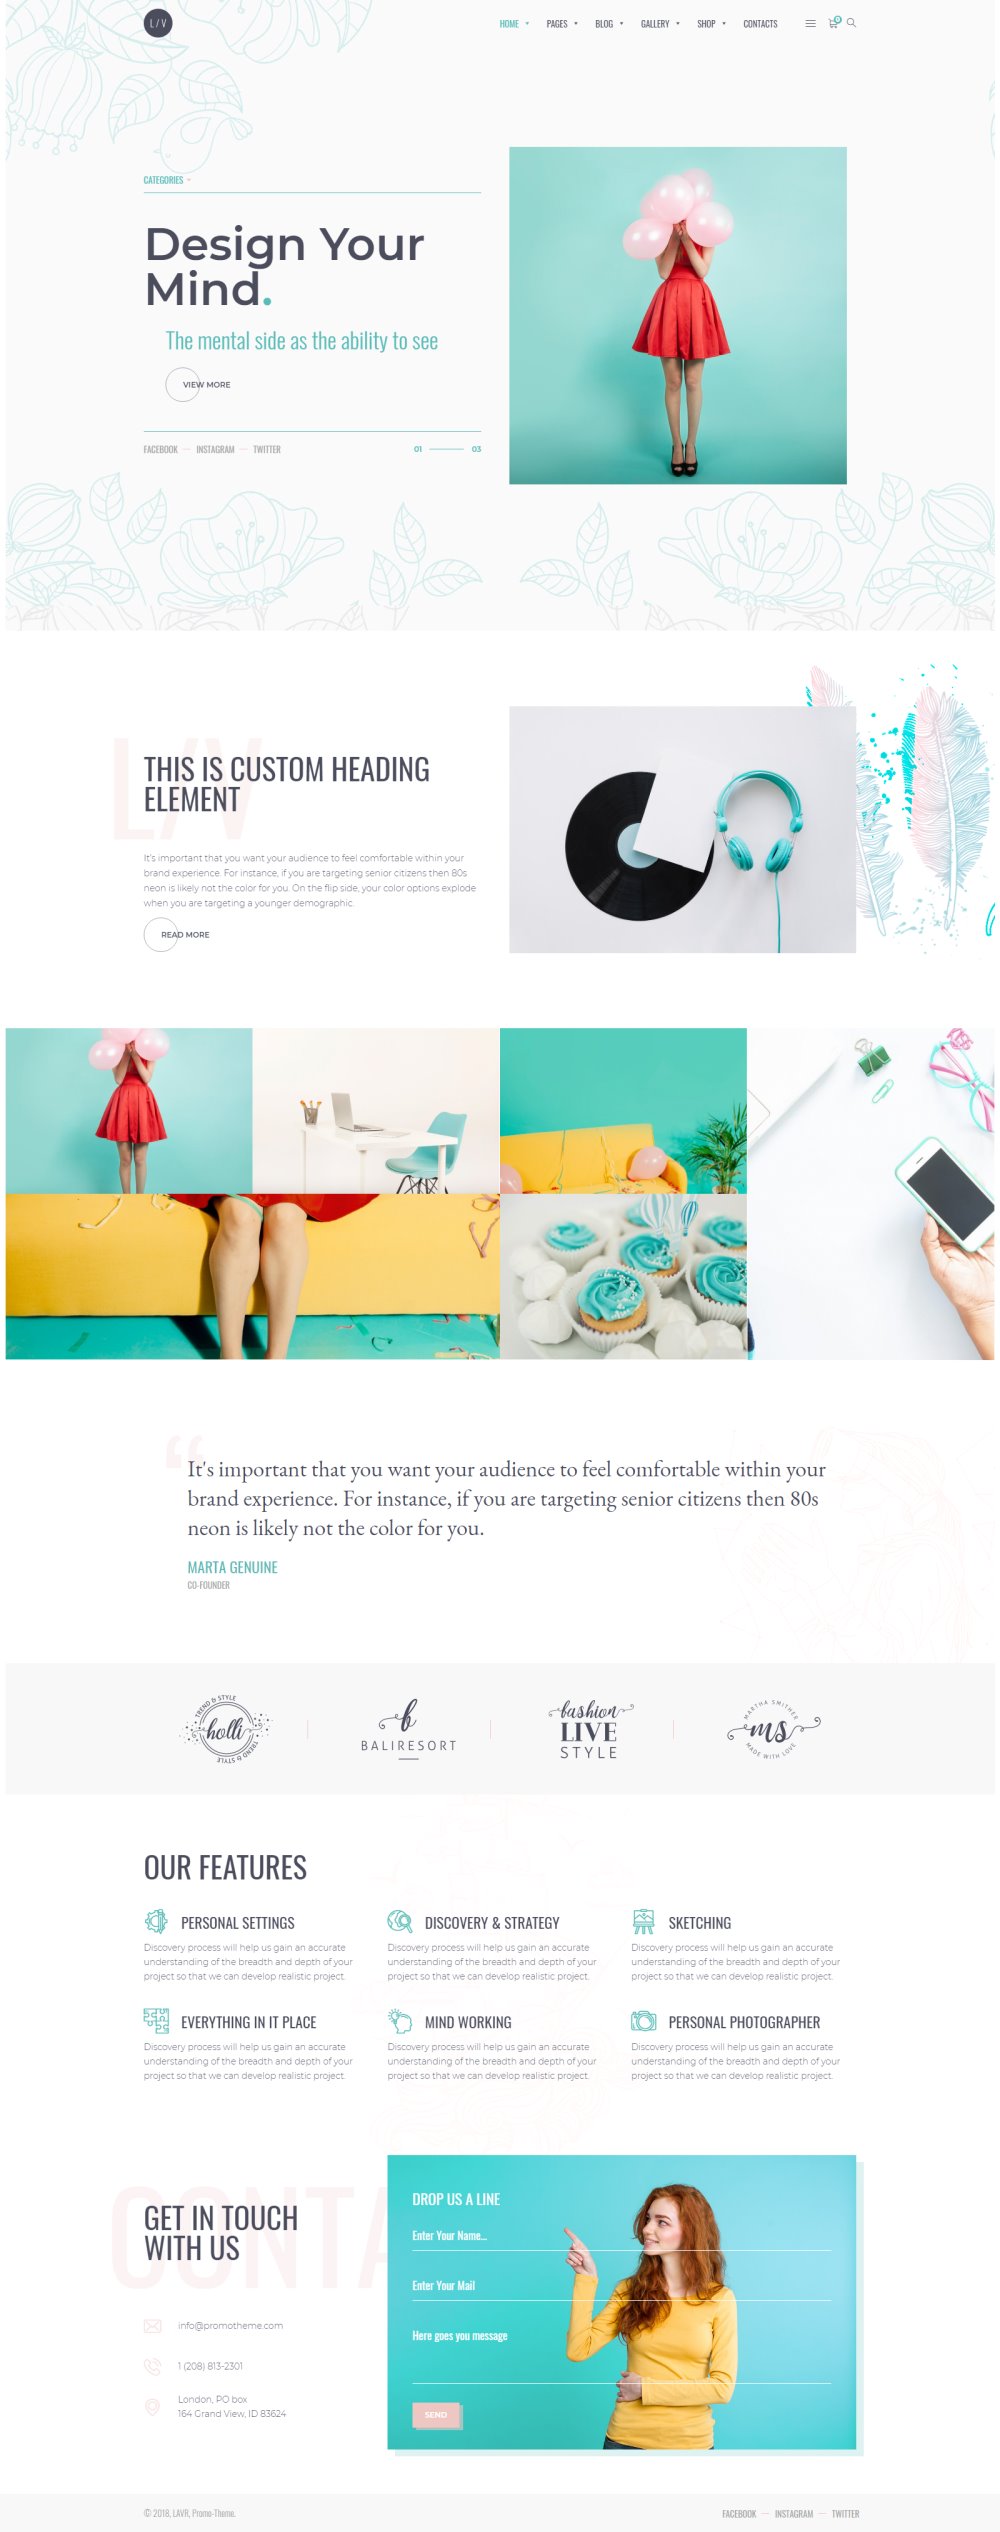 Best WordPress Themes and Web Design for Creatives